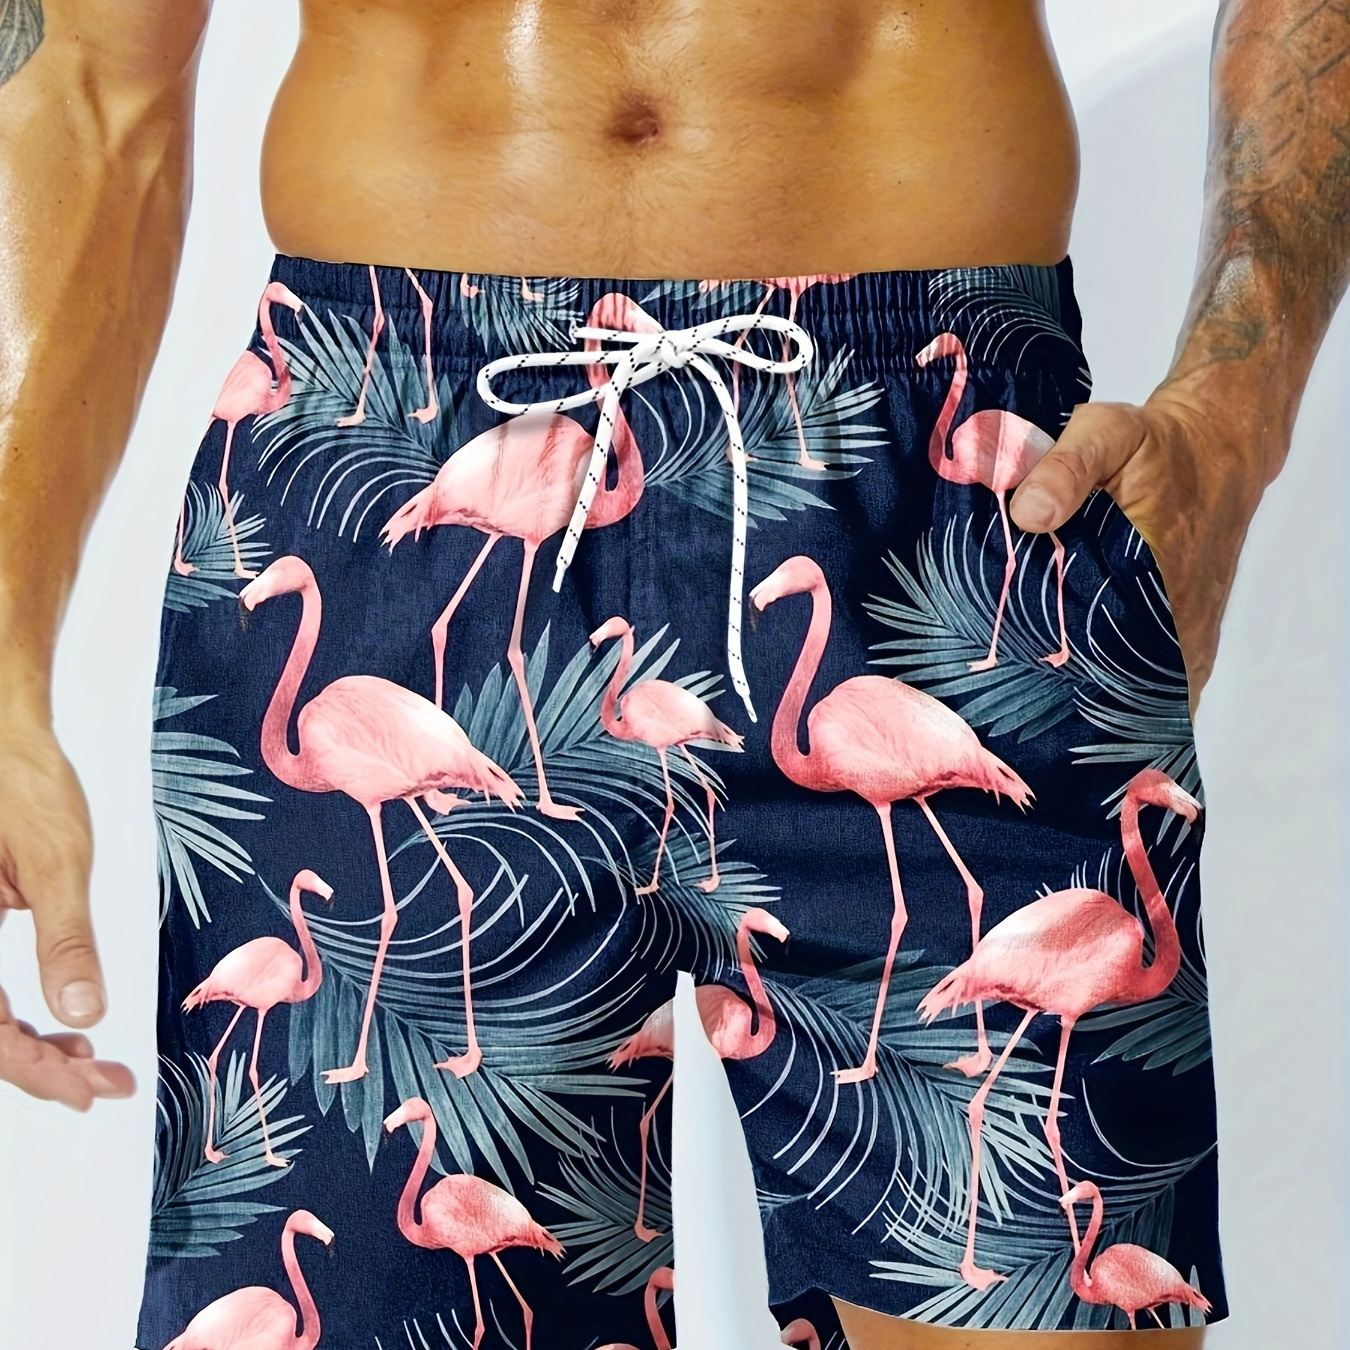 

Men's Flamingo And Tropical Floral Pattern Board Shorts With Drawstring And Pockets, Trendy And Chic Shorts For Summer Leisurewear And Beach Vacation